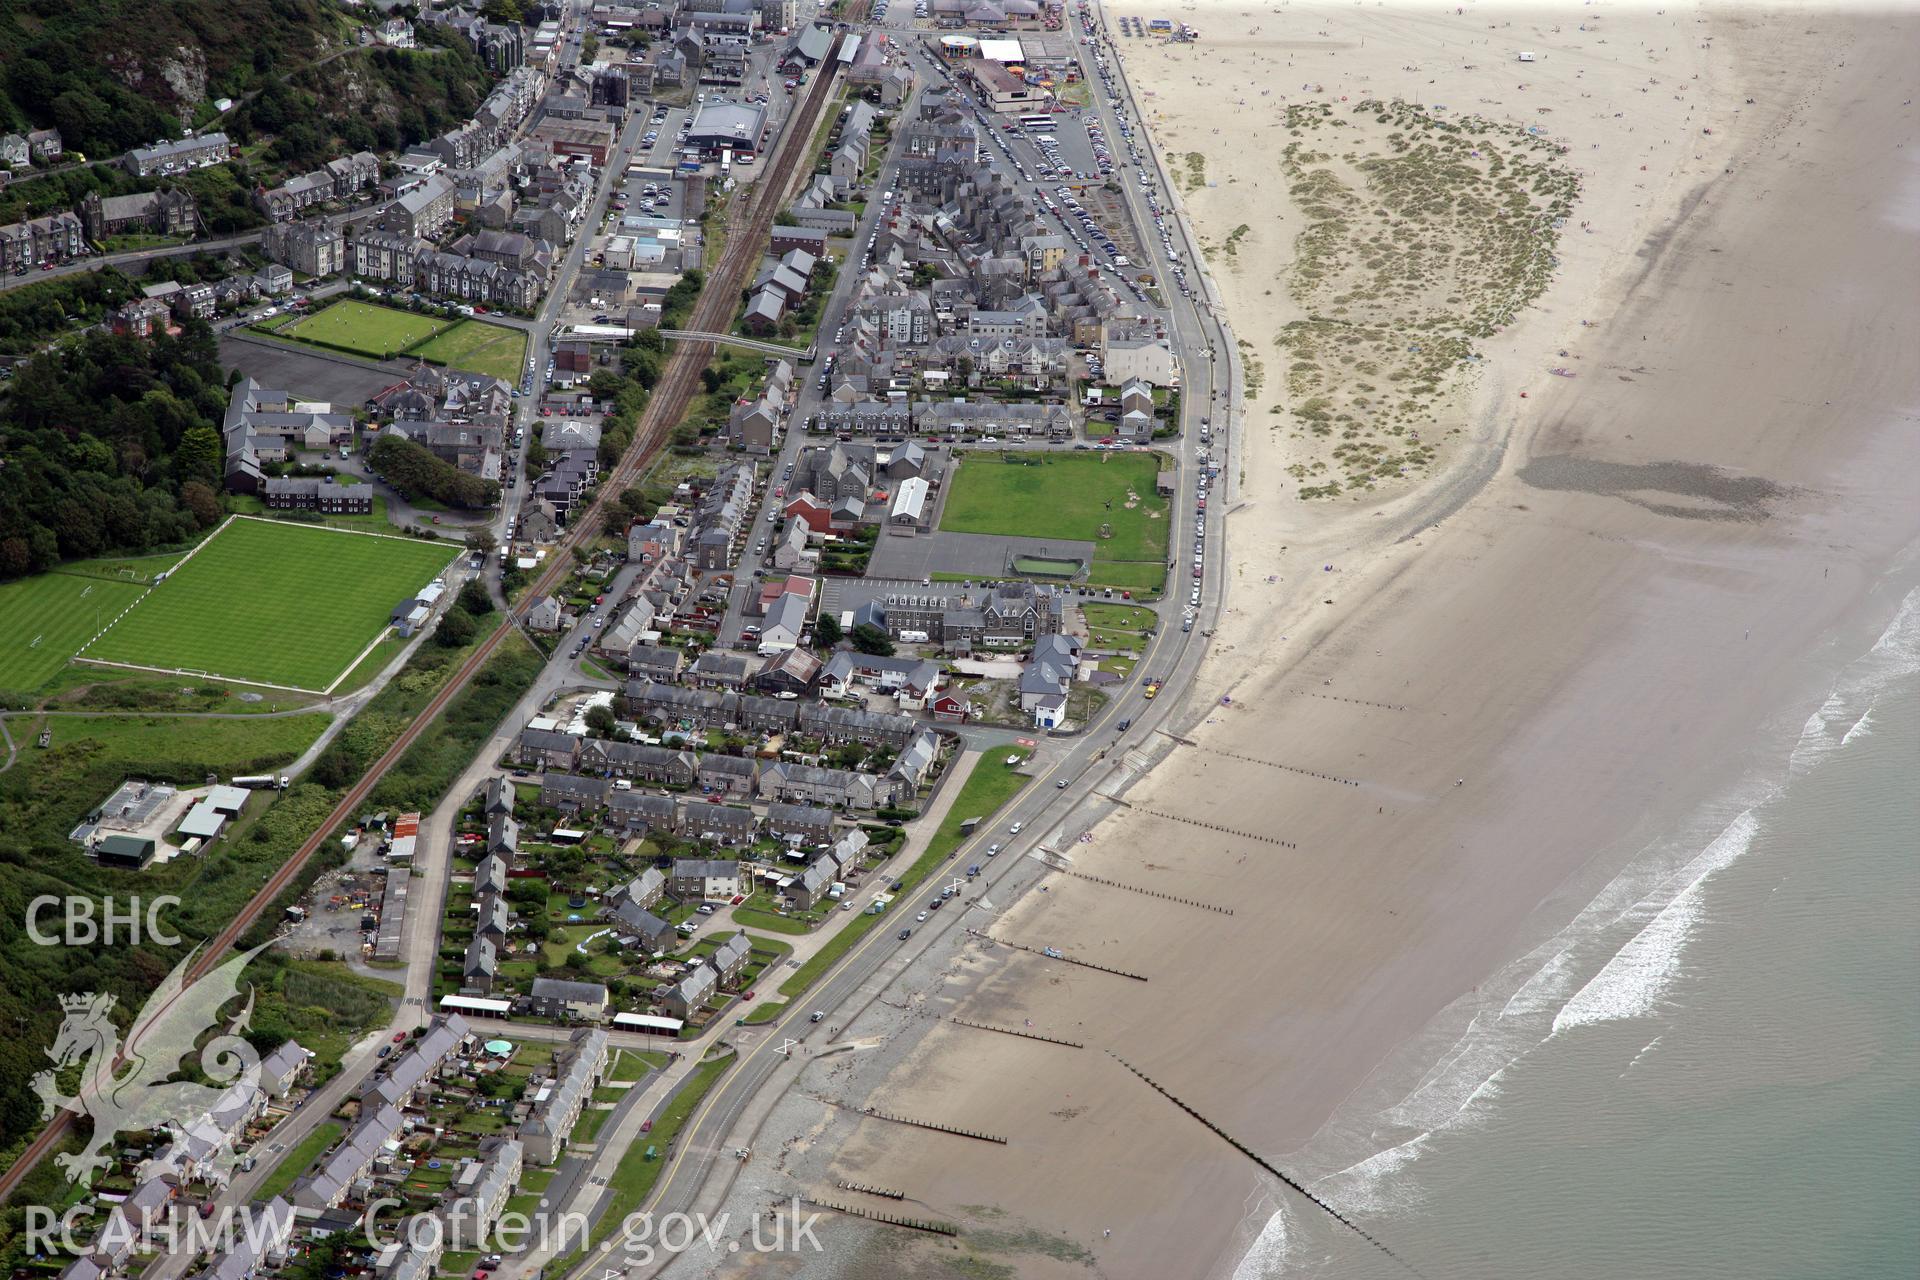 RCAHMW colour oblique photograph of Barmouth. Taken by Toby Driver on 17/08/2011.